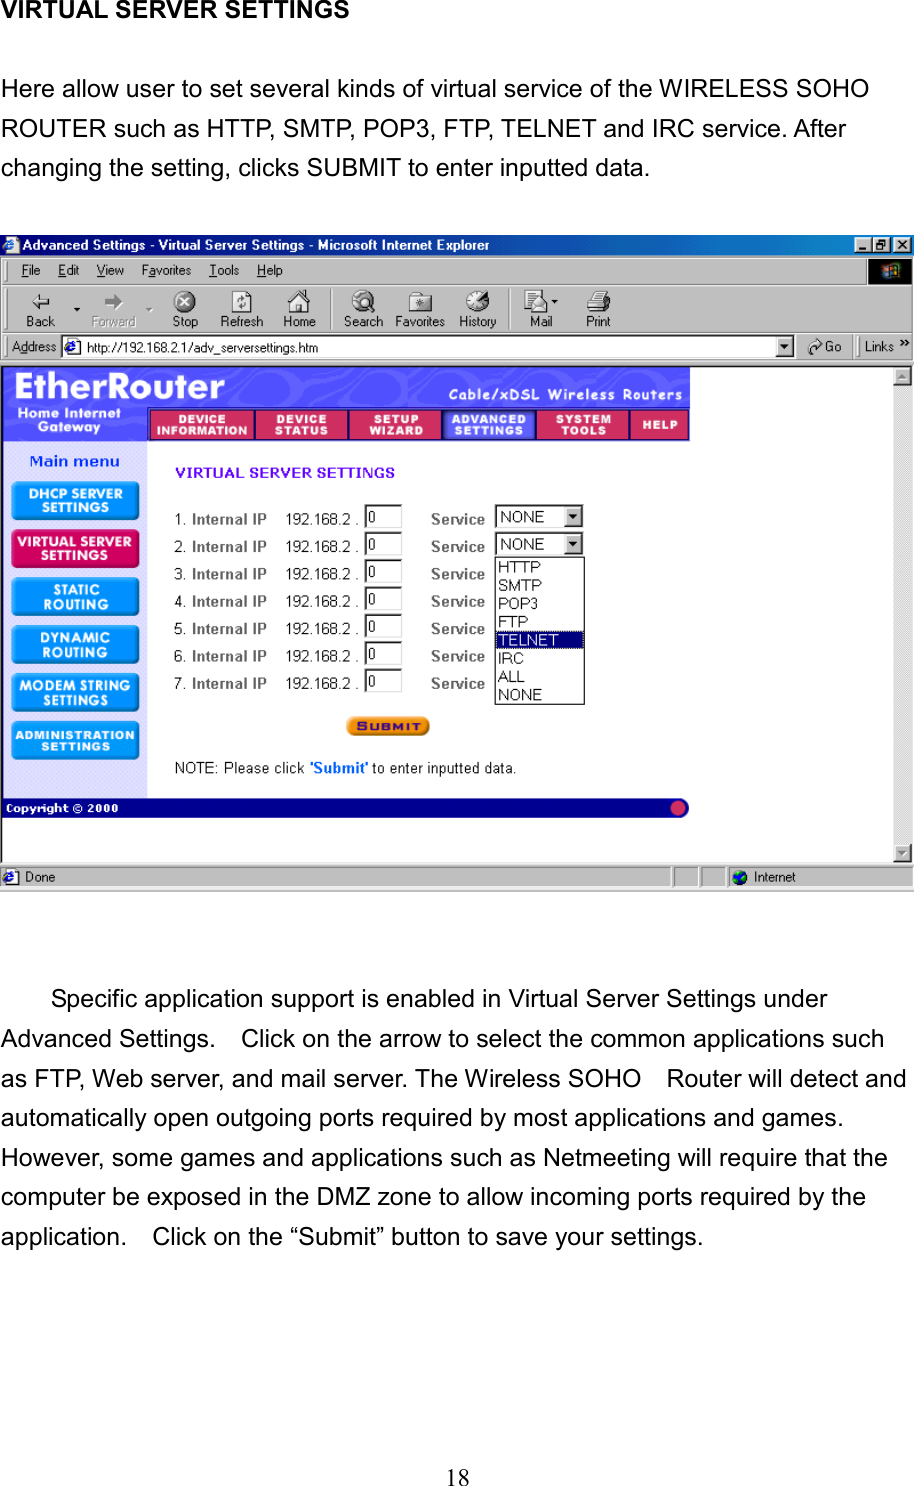  18  VIRTUAL SERVER SETTINGS    Here allow user to set several kinds of virtual service of the WIRELESS SOHO ROUTER such as HTTP, SMTP, POP3, FTP, TELNET and IRC service. After changing the setting, clicks SUBMIT to enter inputted data.     Specific application support is enabled in Virtual Server Settings under Advanced Settings.    Click on the arrow to select the common applications such as FTP, Web server, and mail server. The Wireless SOHO    Router will detect and automatically open outgoing ports required by most applications and games. However, some games and applications such as Netmeeting will require that the computer be exposed in the DMZ zone to allow incoming ports required by the application.    Click on the “Submit” button to save your settings.    